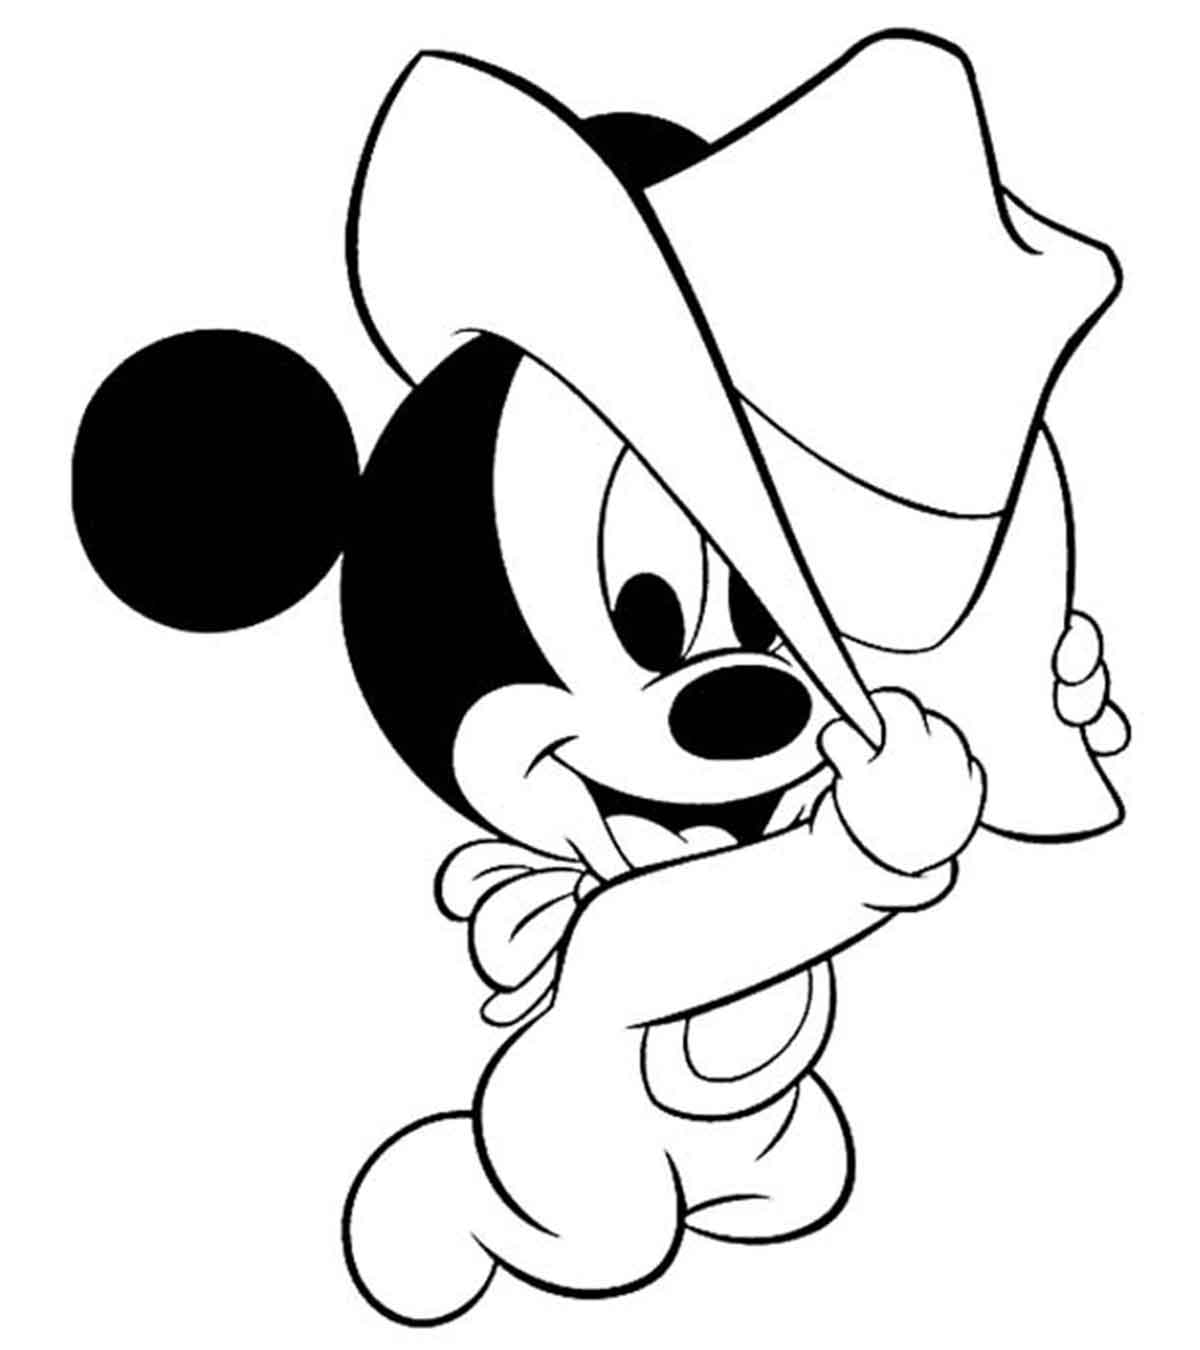 Mickey Mouse Coloring Page Top 75 Free Printable Mickey Mouse Coloring Pages Online